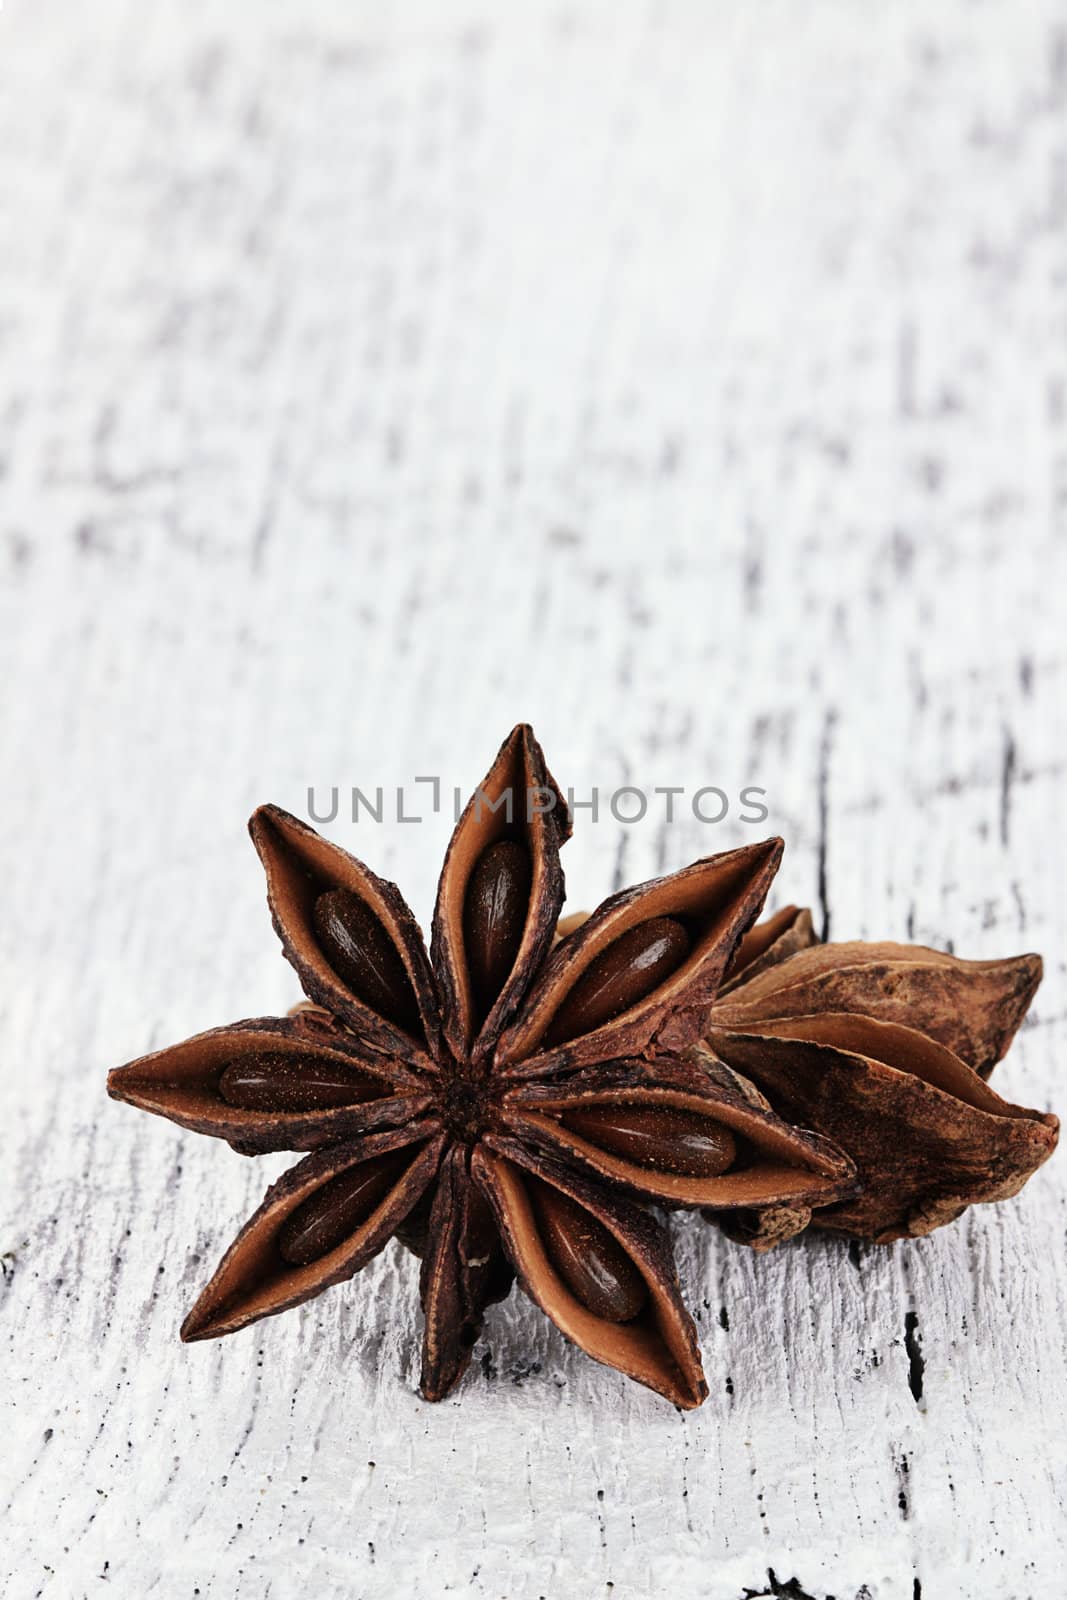 Star Anise spice over a white wooden background. Copyspace available.